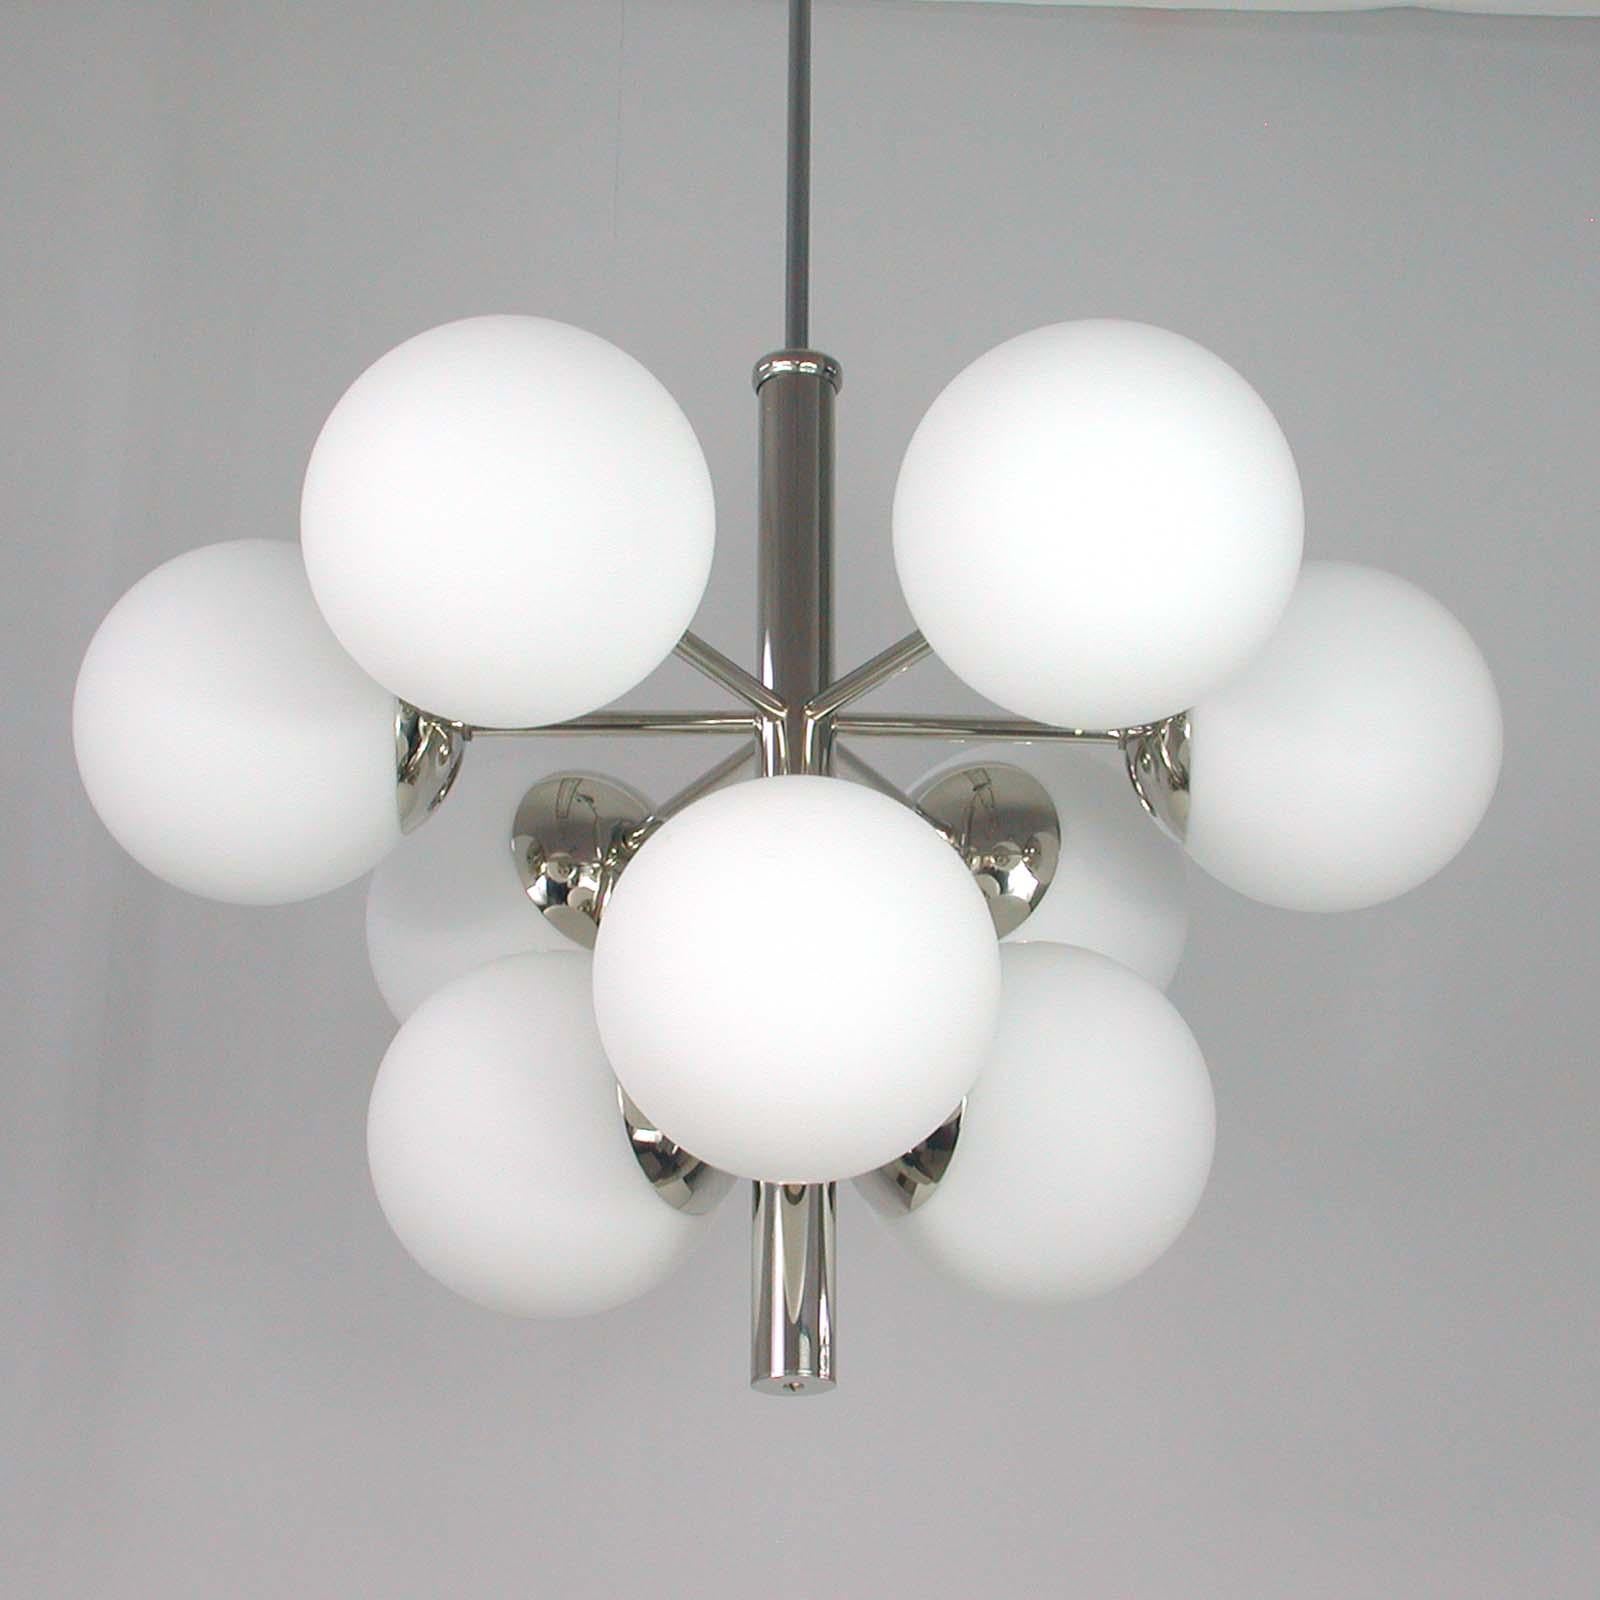 This beautiful chandelier was designed and manufactured in Germany in the 1960s by Fischer Leuchten. It is made of chrome-plated metal and has got nine white frosted satinated glass lamp shades. Each lamp shade has got an E14 screw on socket.